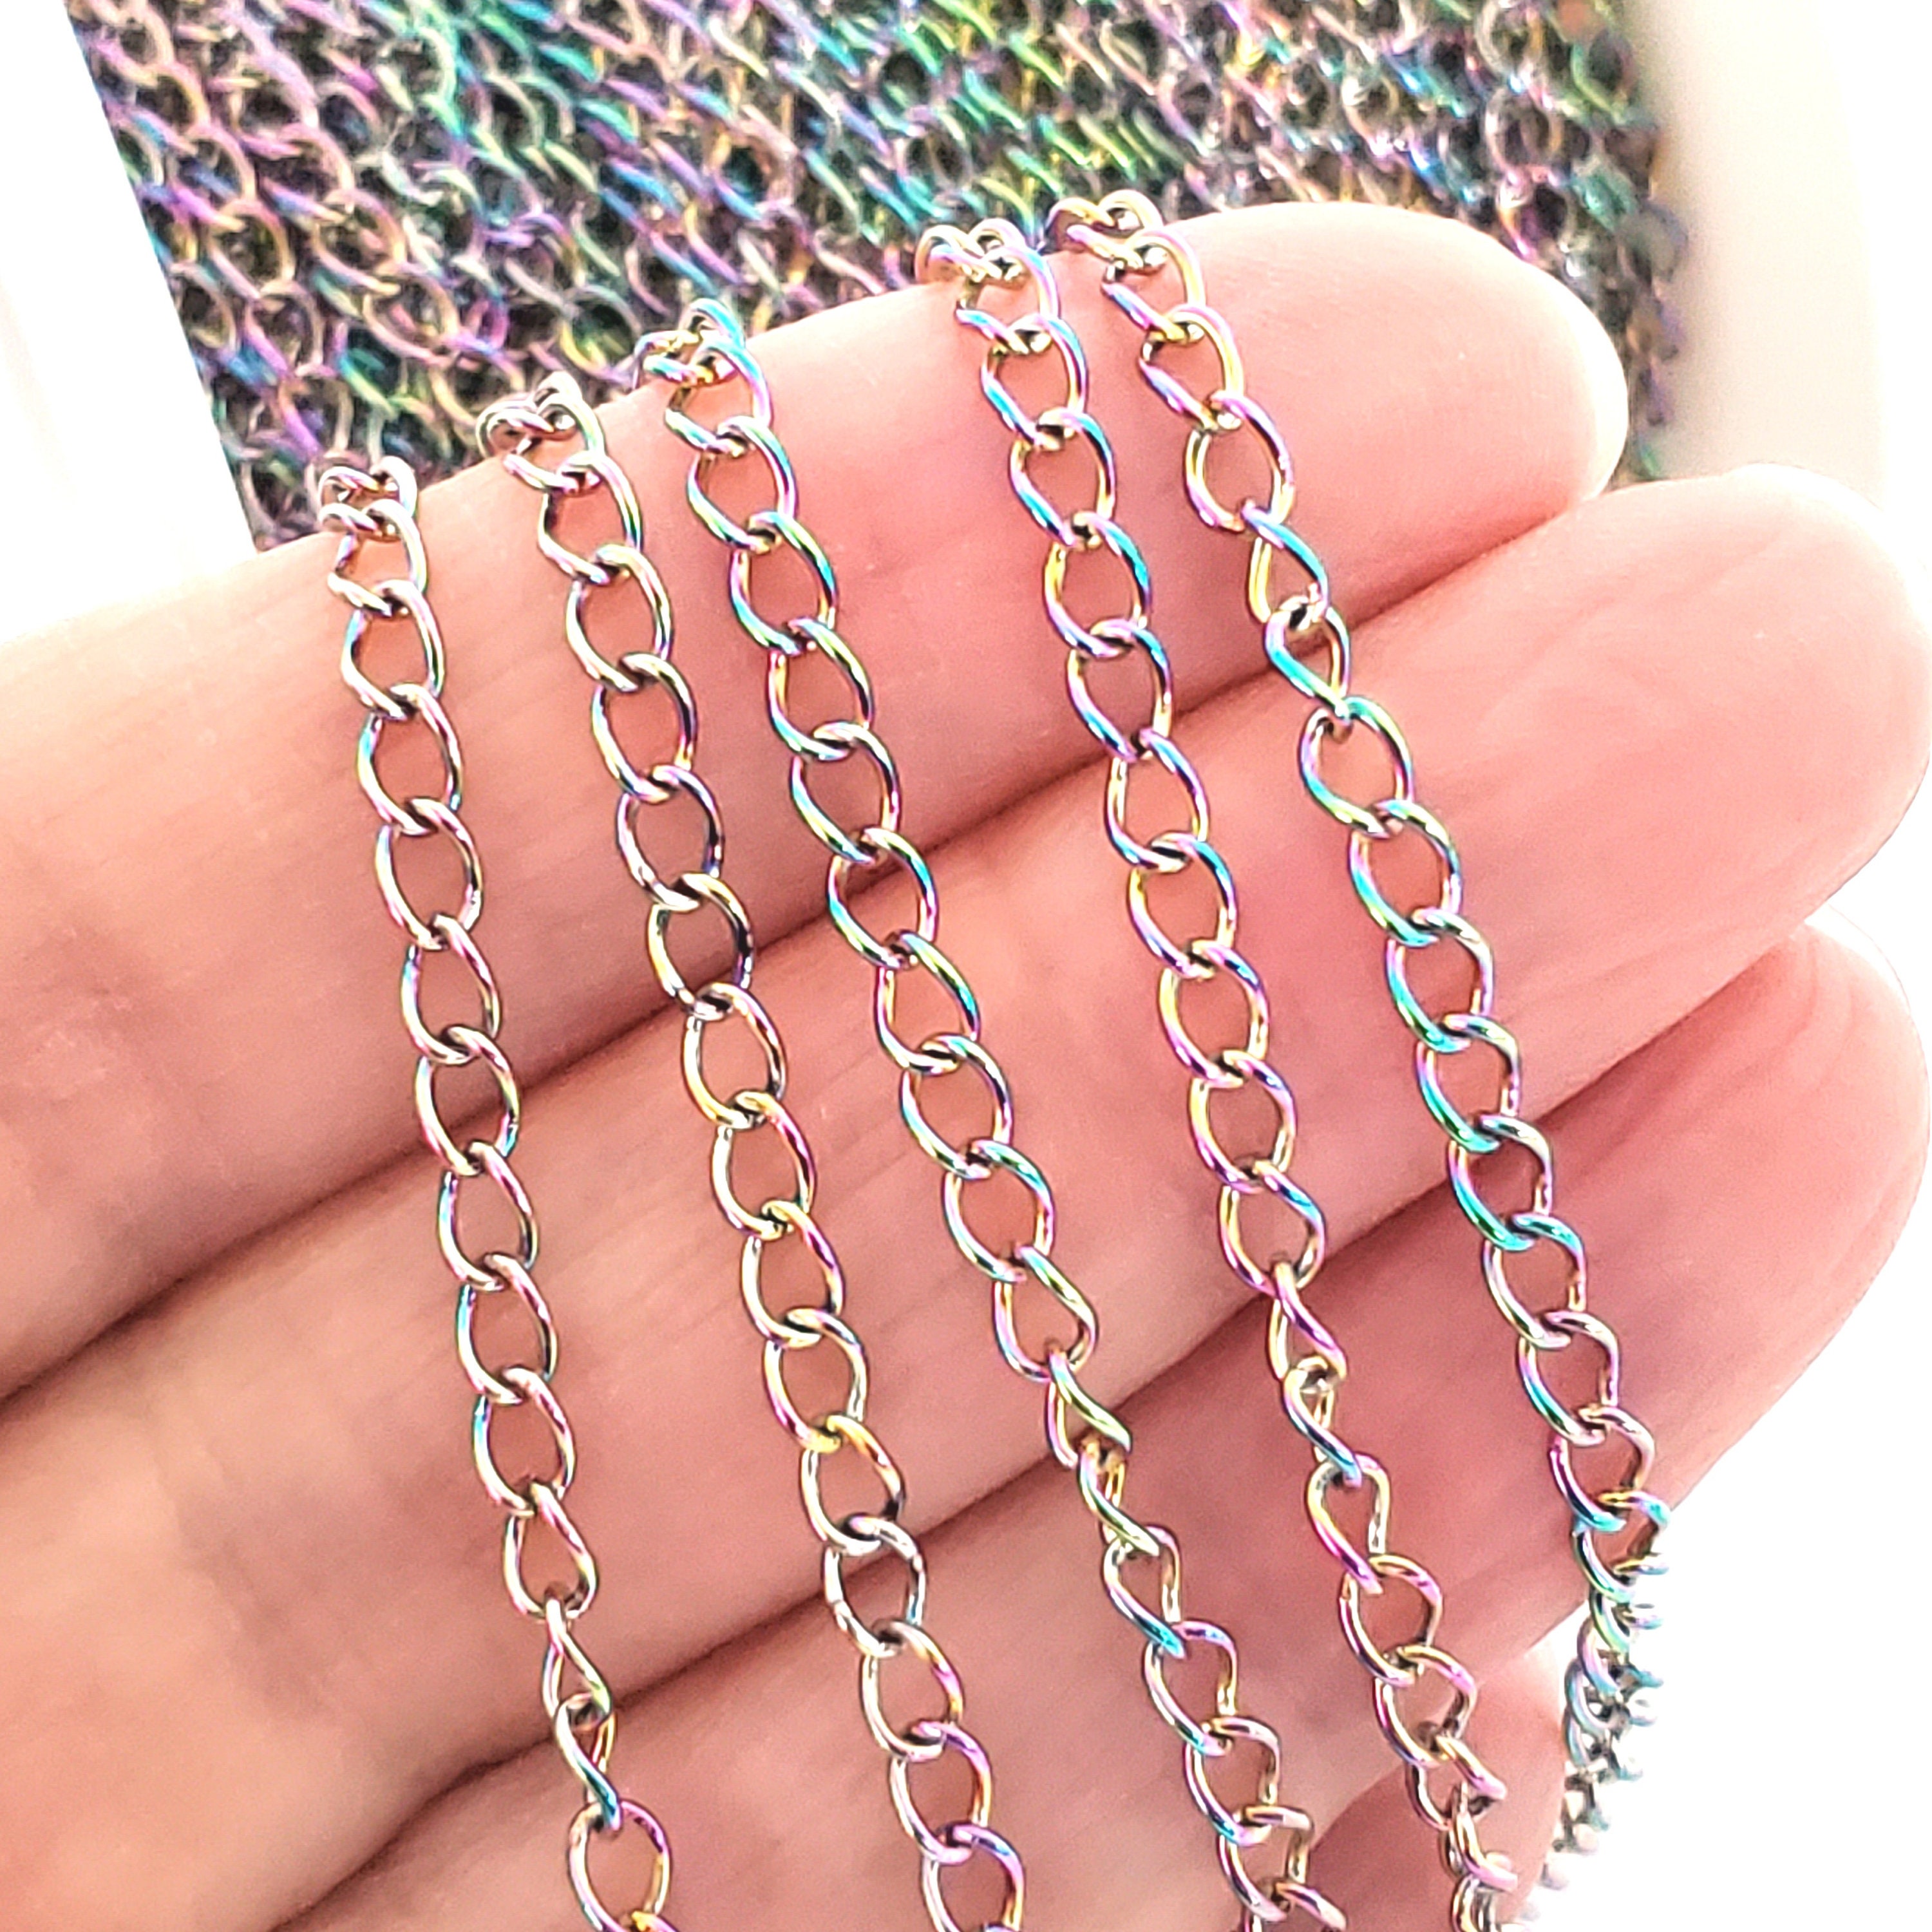 Rainbow Titanium Over Stainless Steel Finished Chain Set of 10 Chains in Assorted Styles & Sizes